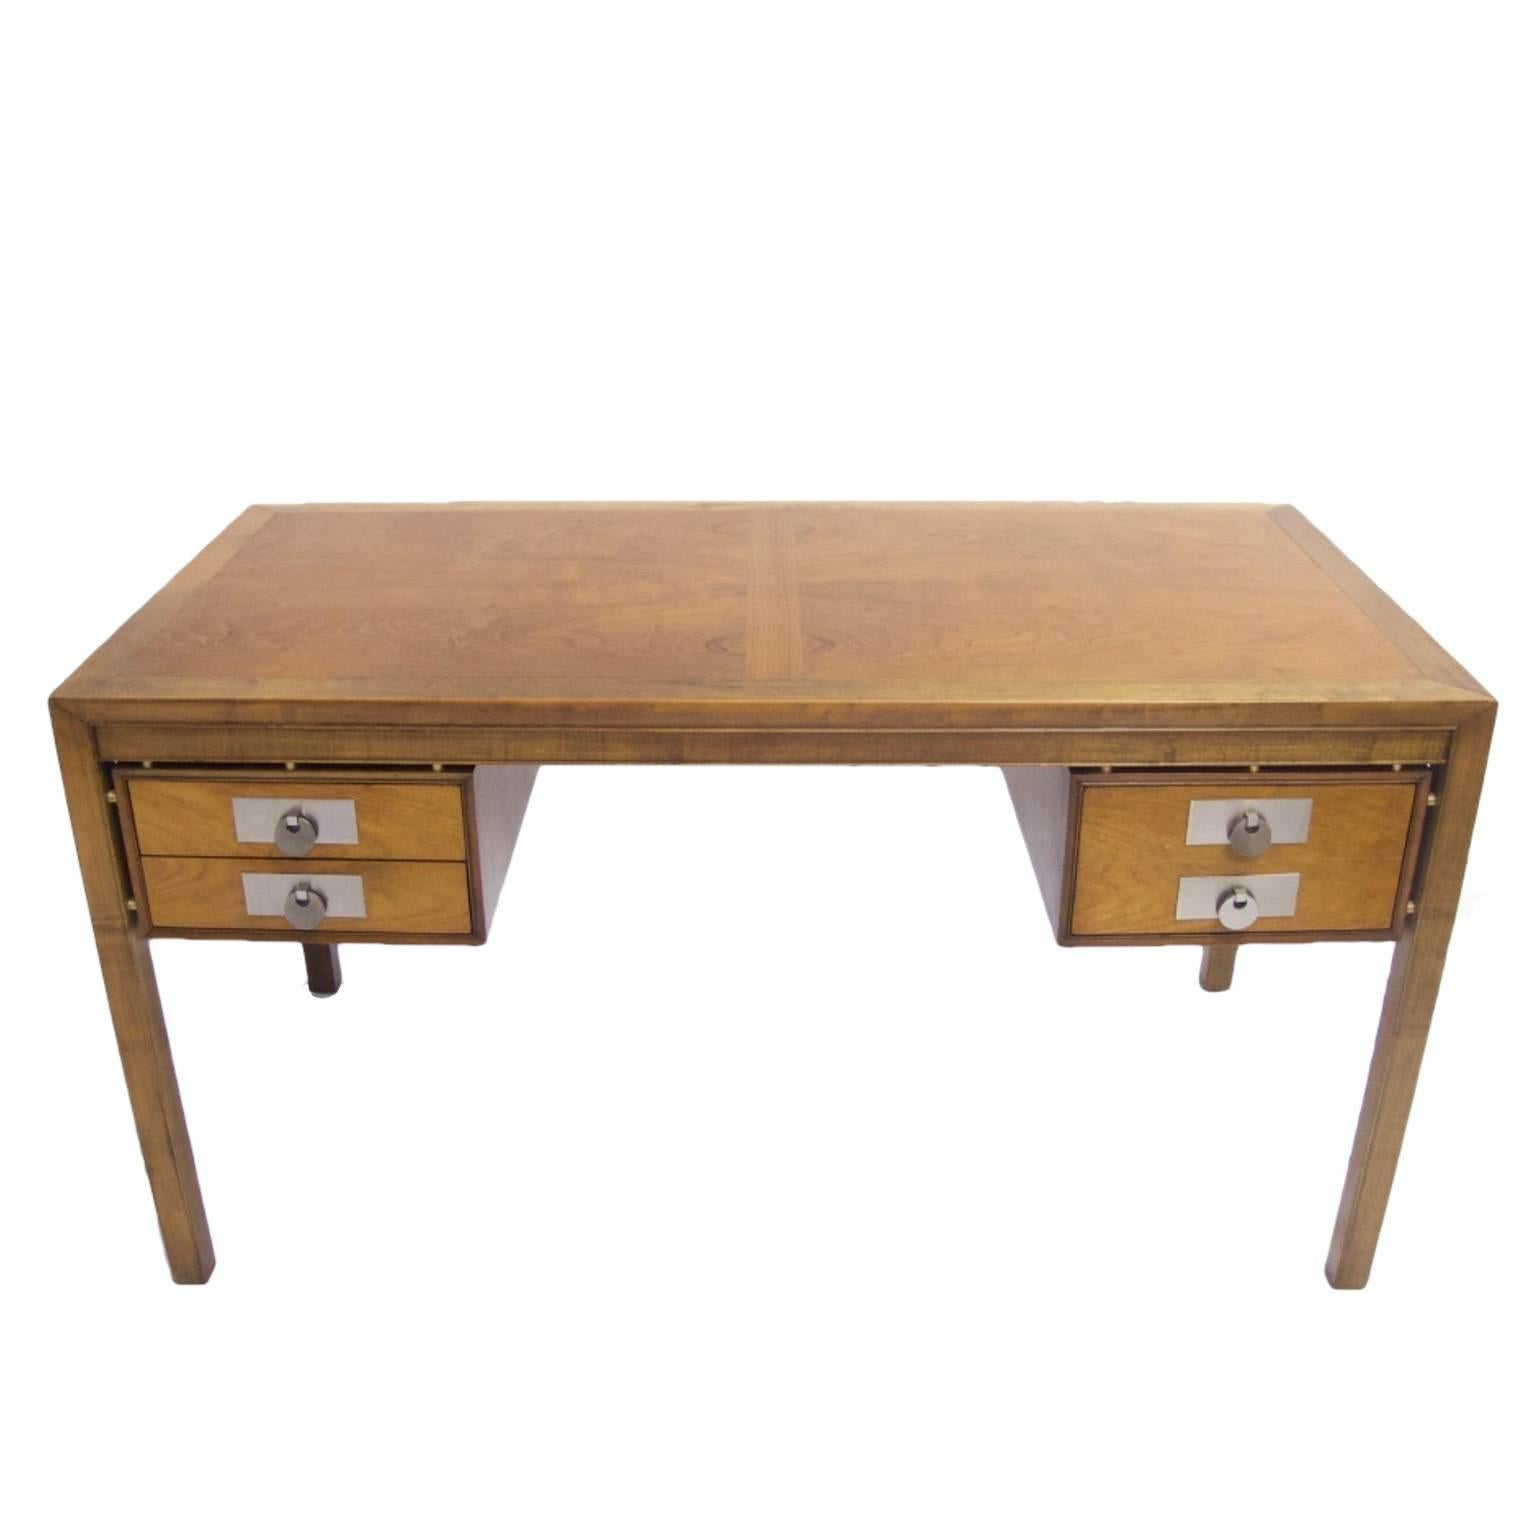 American Michael Taylor for Baker Mid-Century Modern Desk in Walnut with Disc Pulls